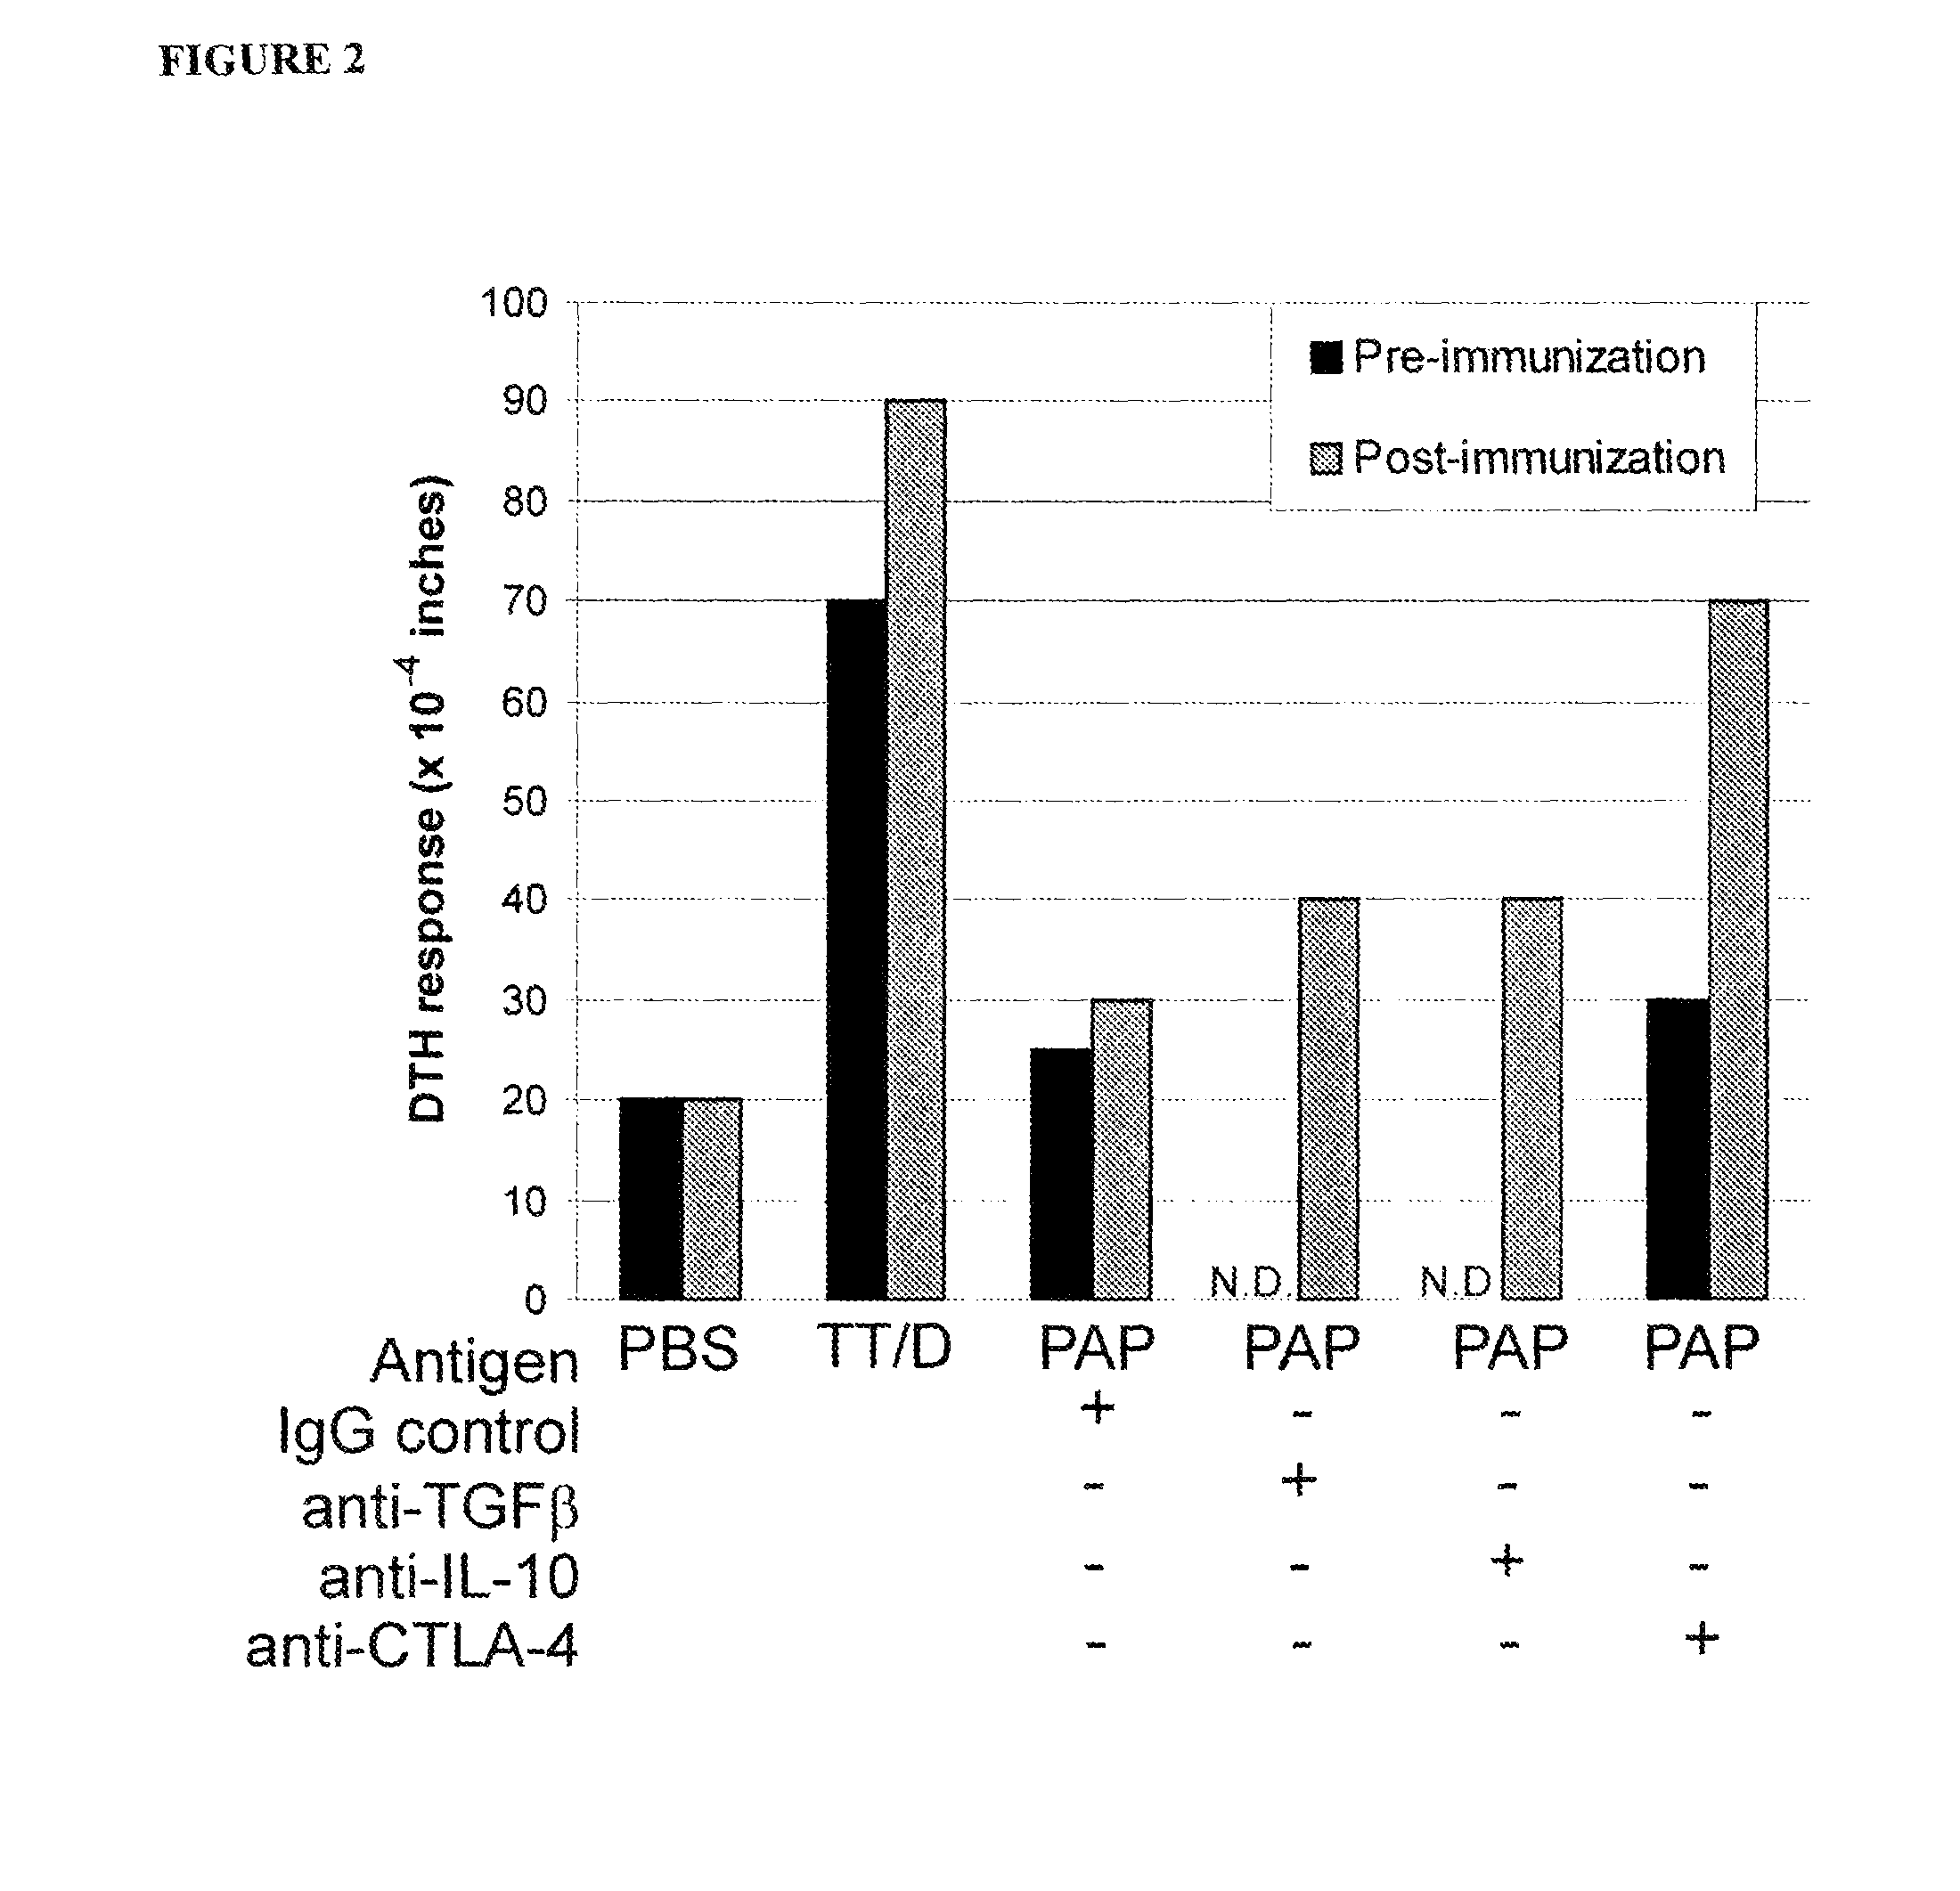 Bystander immune suppression as a predictor for response to a vaccine